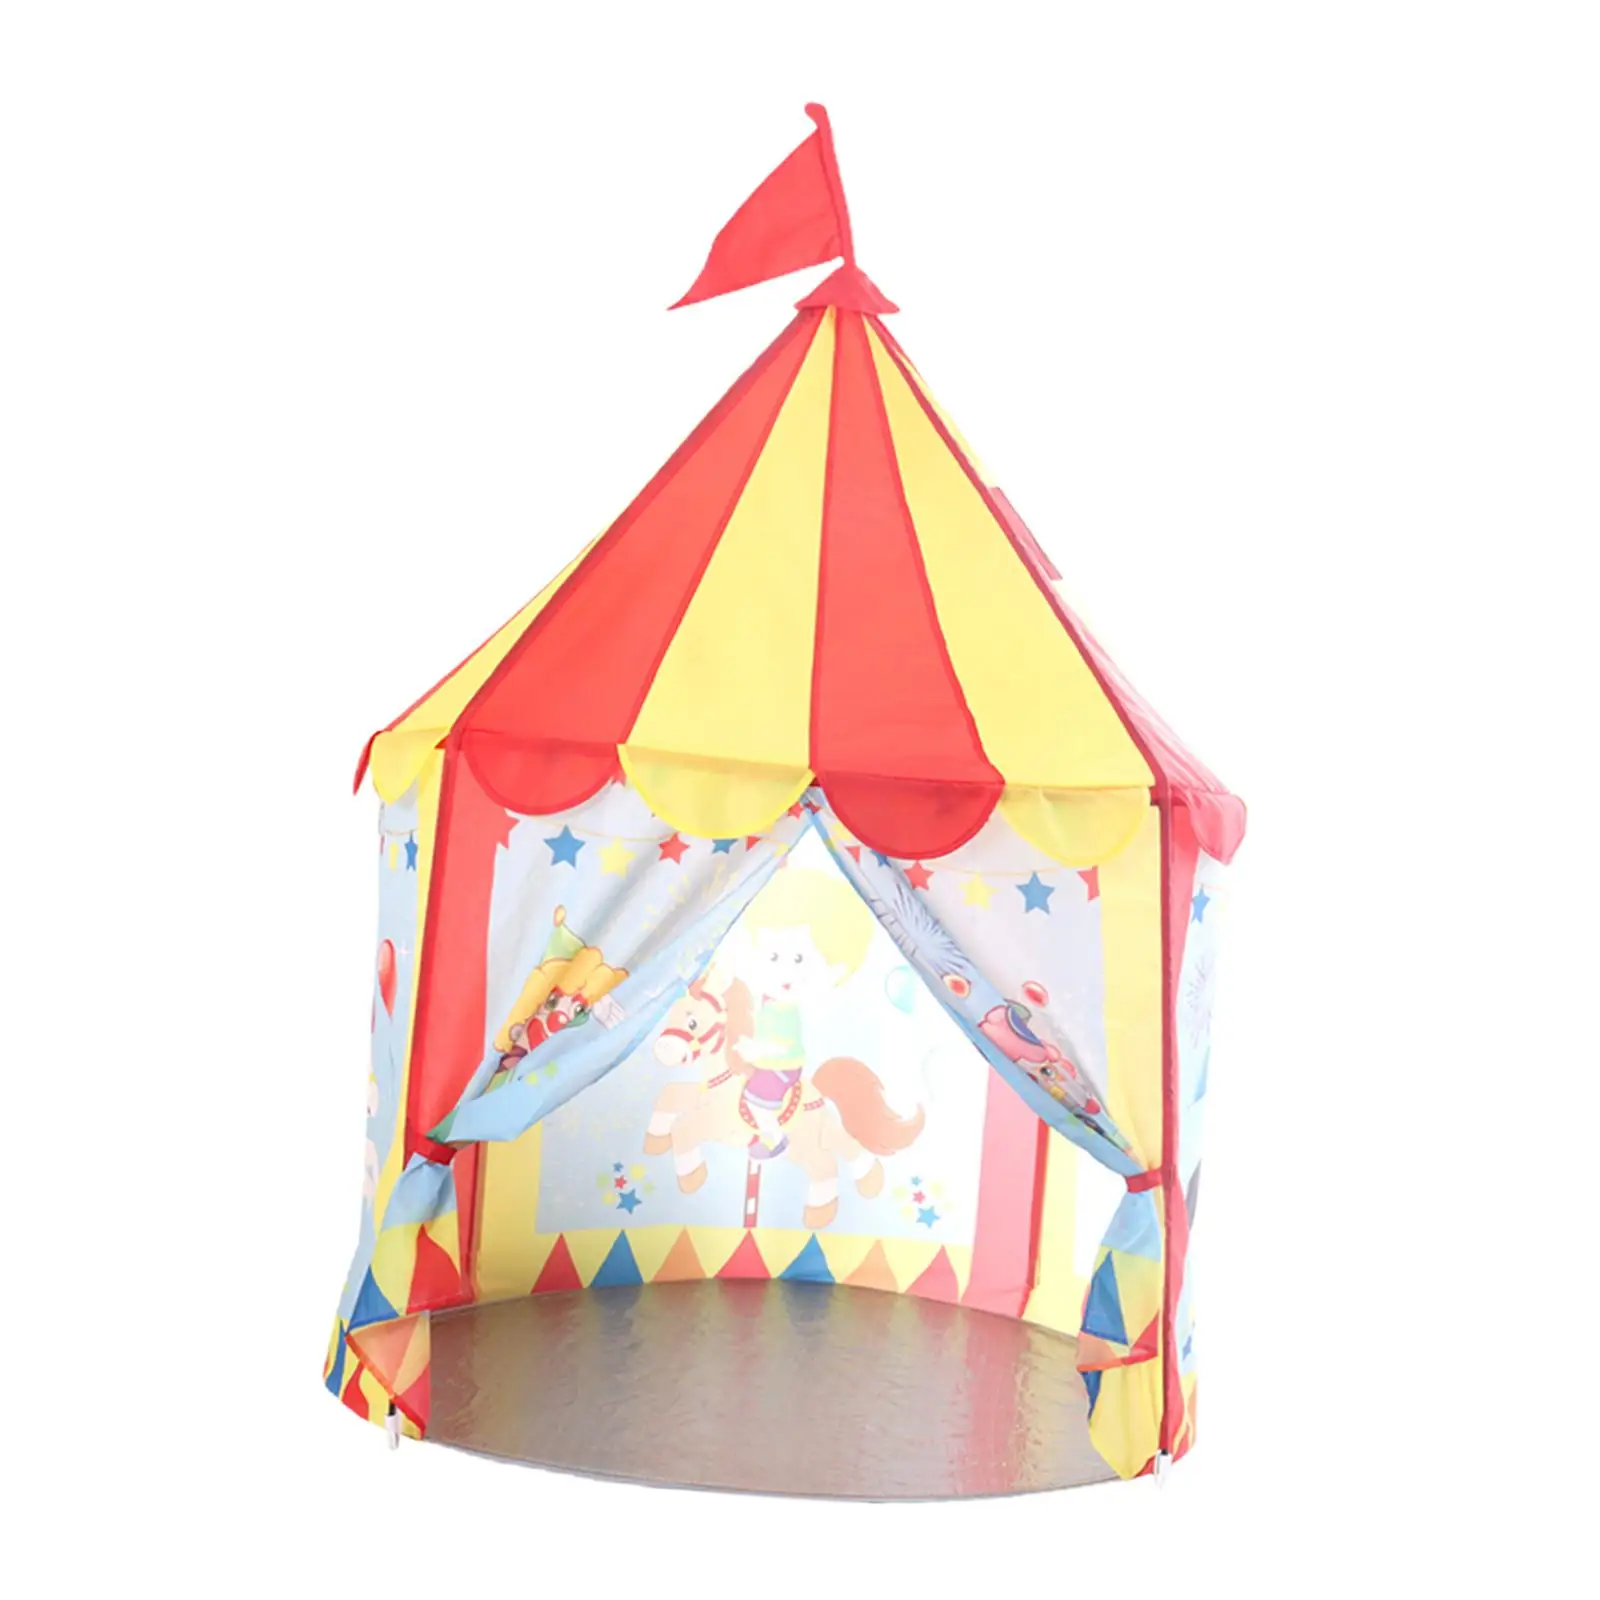 Play Tent Best Gift for Boys Girls Play Teepee Kids Playhouse Prince Castle Tent for Games Yard Camping home